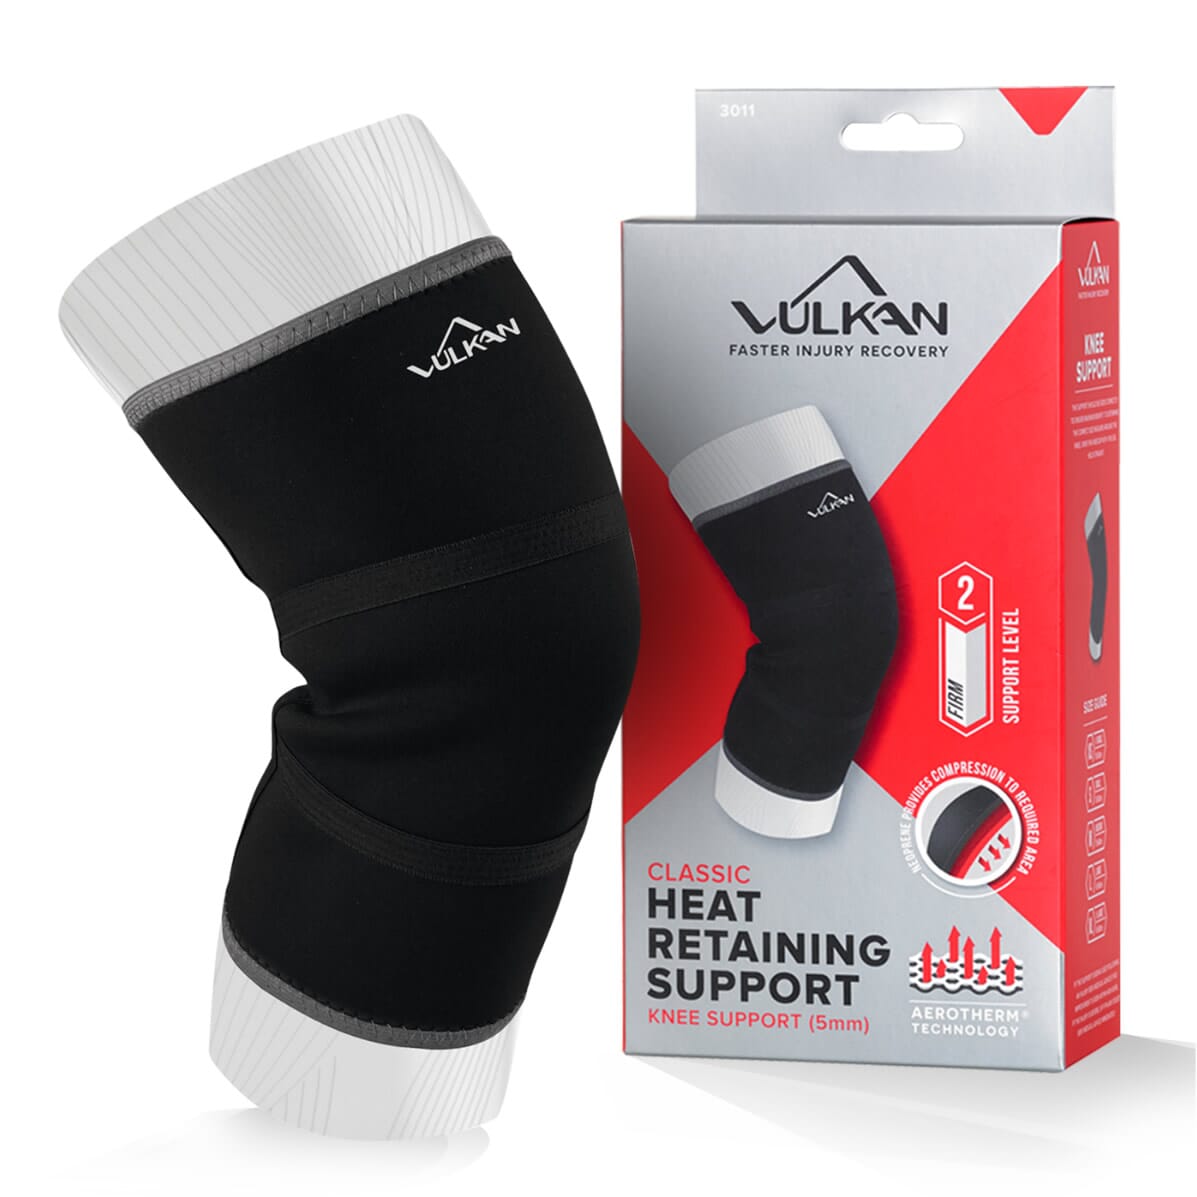 View Knee Support Vulkan Small 3mm thick information